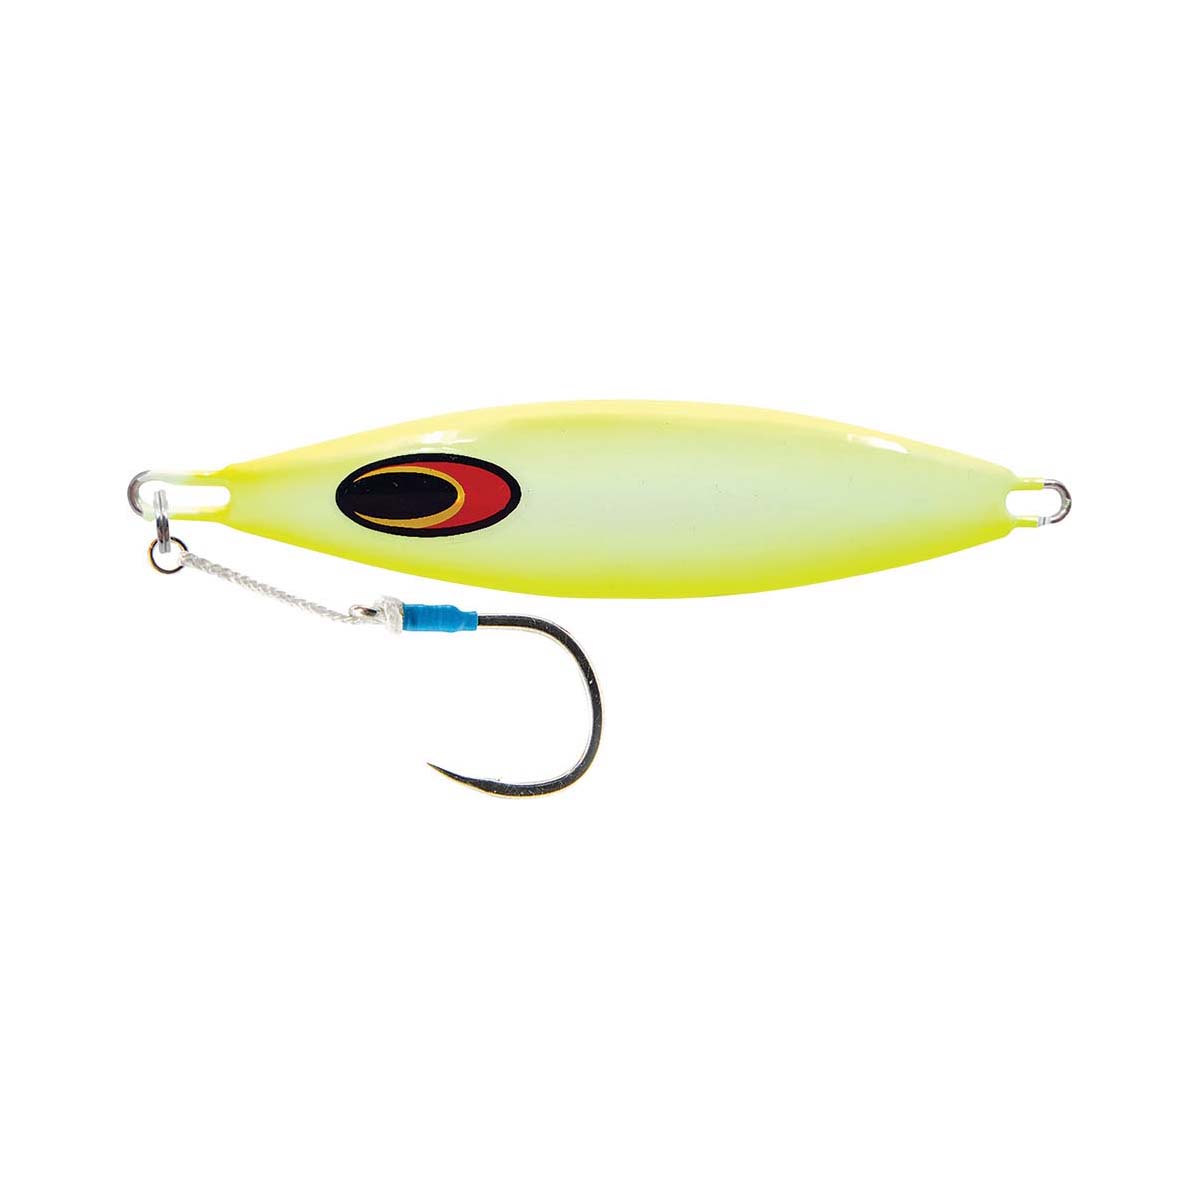 Nomad Buffalo Jig Lure 230g Chartreuse White Glow @ Club BCF